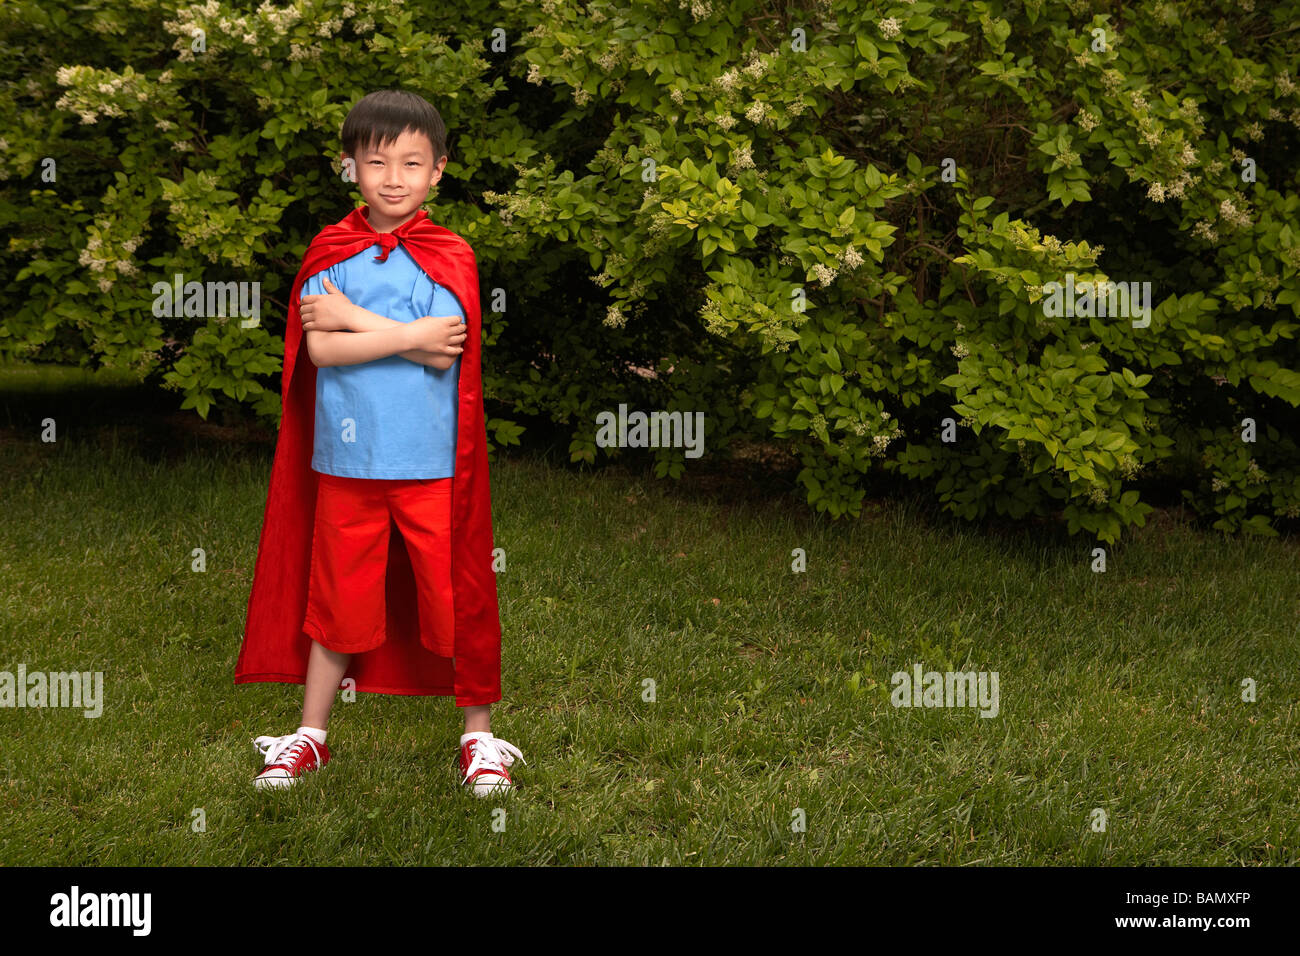 Boy In Red Cape Playing In Garden Stock Photo